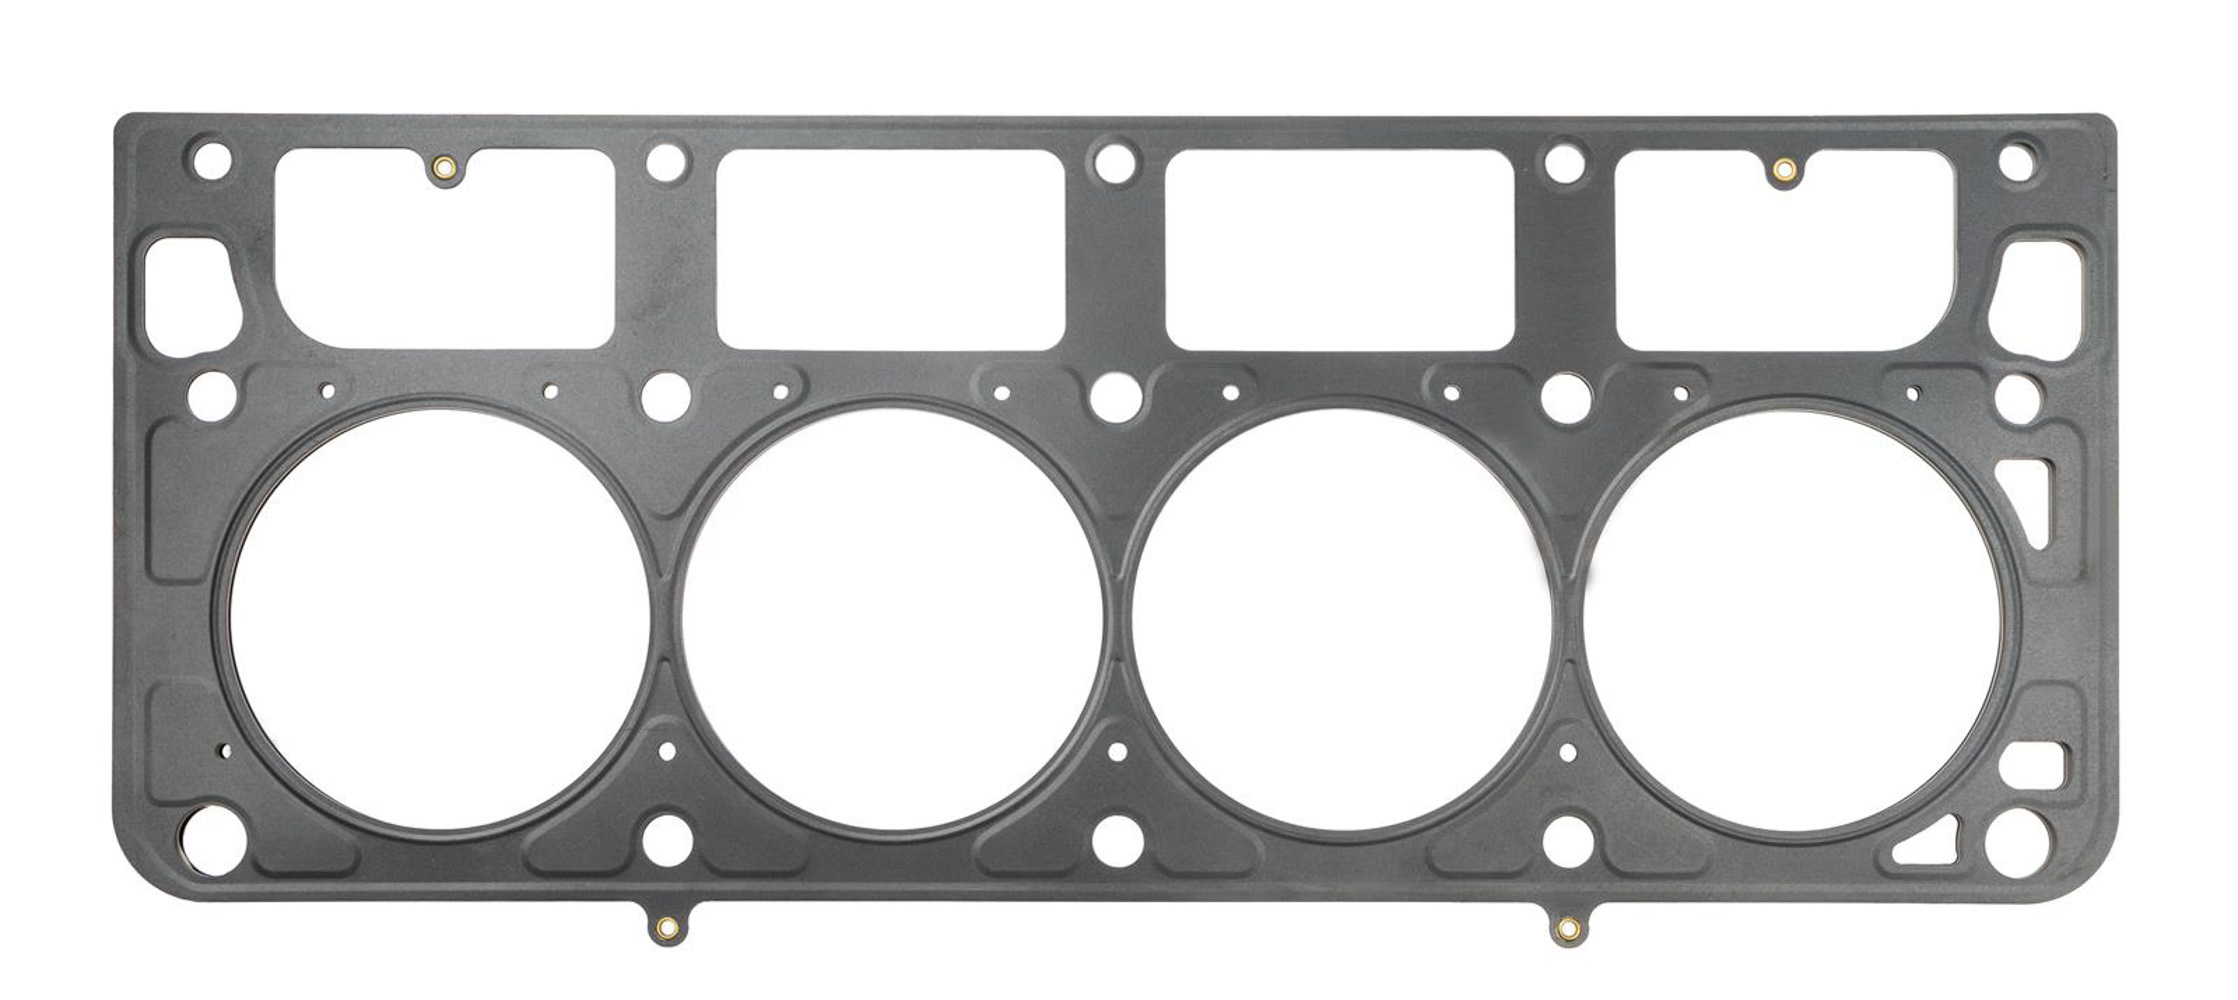 SCE Gaskets M201651 - Cylinder Head Gasket, MLS Spartan, 4.160 in Bore, 0.051 in Compression Thickness, Multi-Layer Steel, GM LS-Series, Each